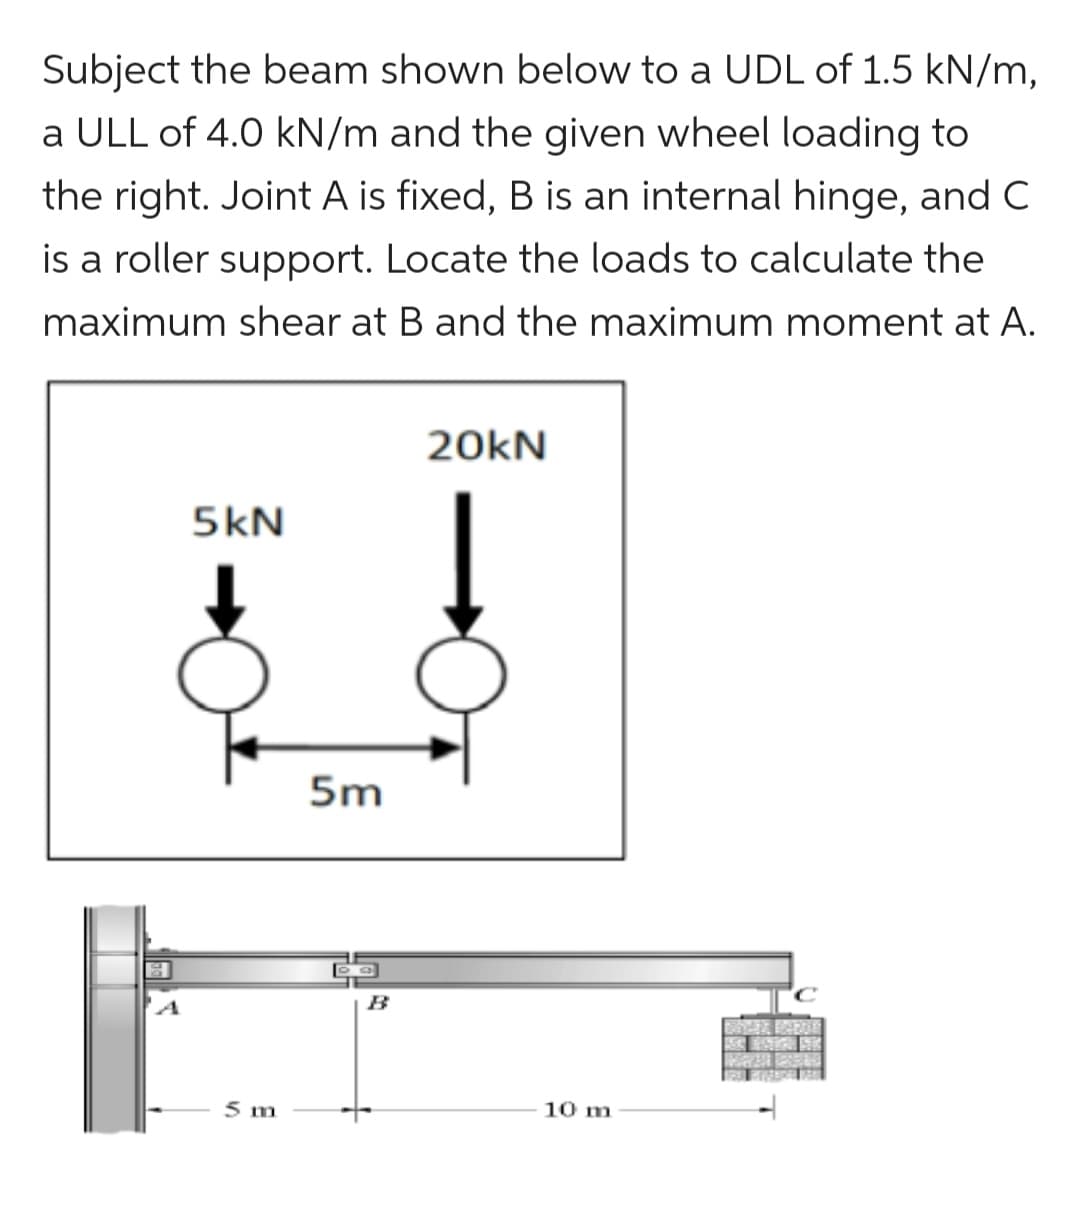 Subject the beam shown below to a UDL of 1.5 kN/m,
a ULL of 4.0 kN/m and the given wheel loading to
the right. Joint A is fixed, B is an internal hinge, and C
is a roller support. Locate the loads to calculate the
maximum shear at B and the maximum moment at A.
5kN
5 m
5m
DG
20kN
10 m
MAIN PEN